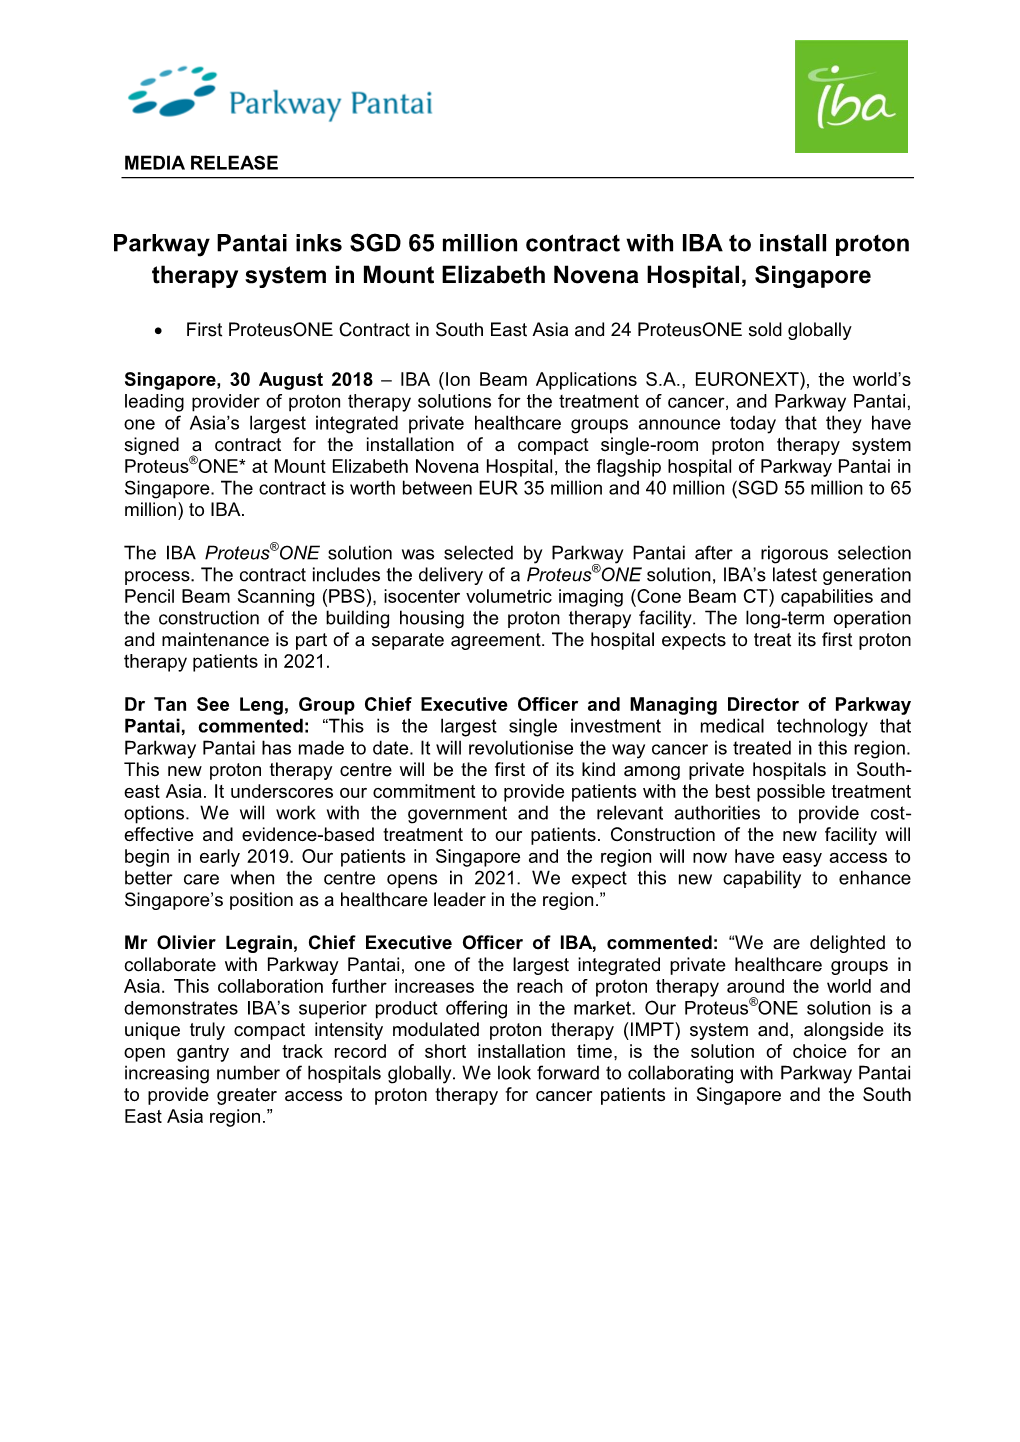 Parkway Pantai Inks SGD 65 Million Contract with IBA to Install Proton Therapy System in Mount Elizabeth Novena Hospital, Singapore